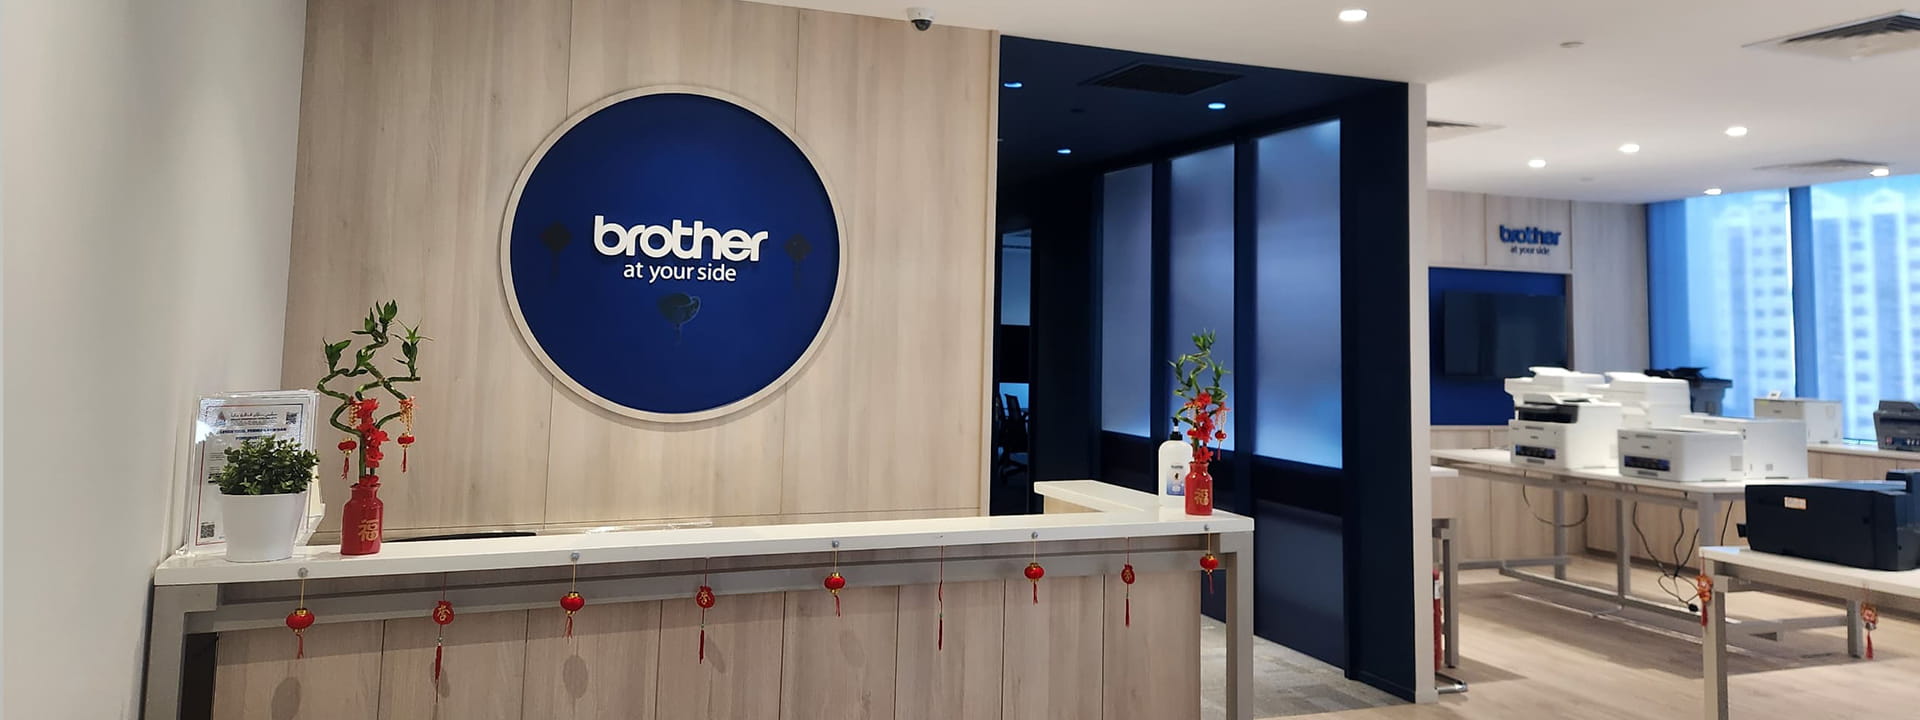 careers-at-brother